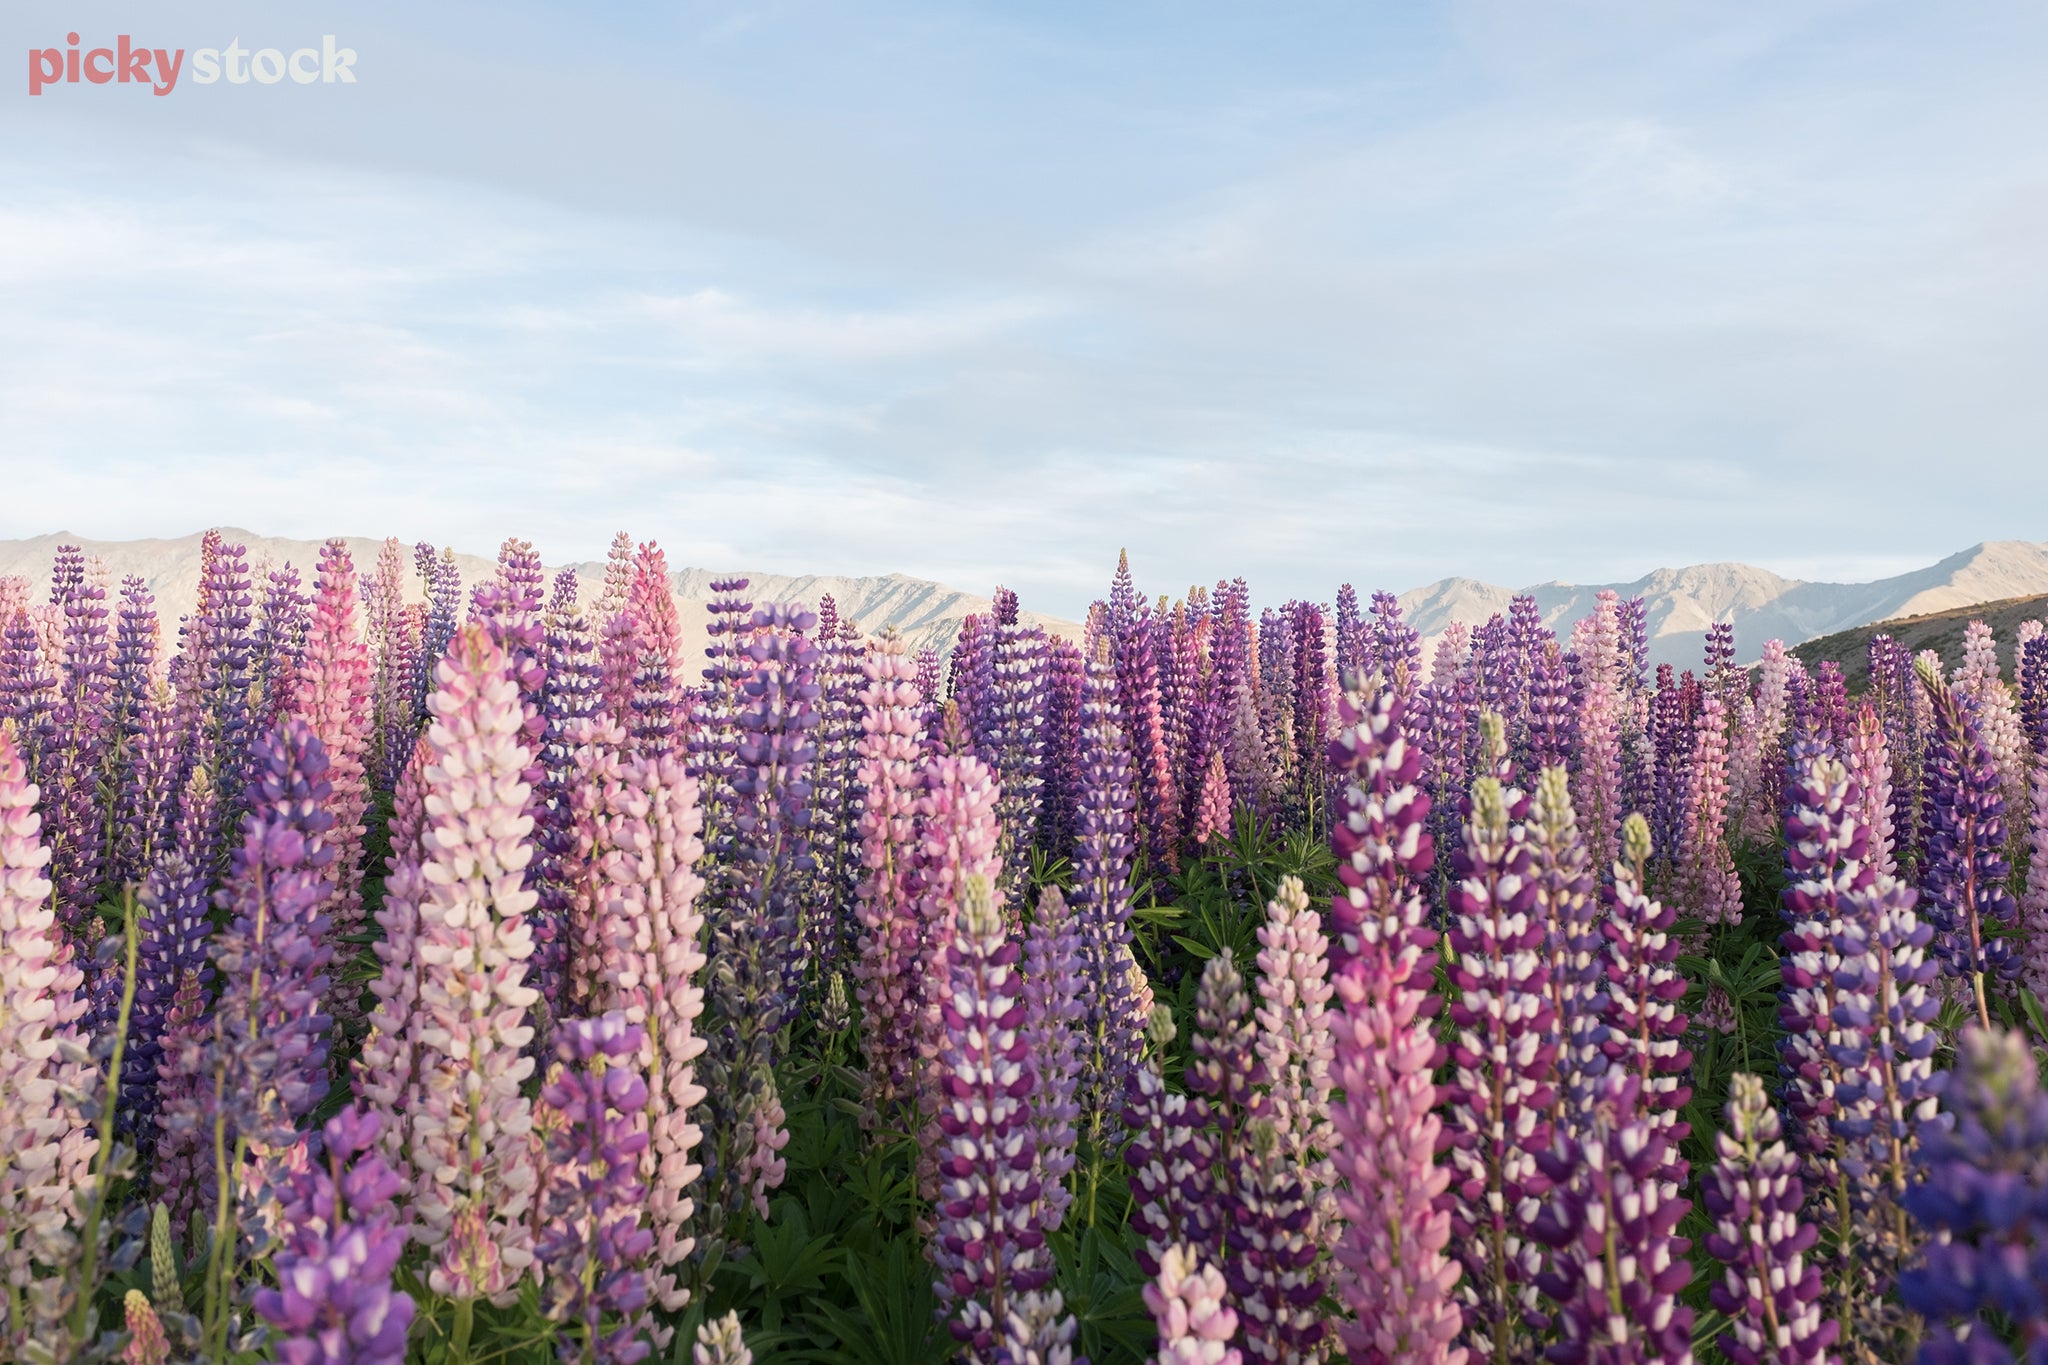 Looking out amongst the variety of lupins, all colours of purple against the blue sky. 